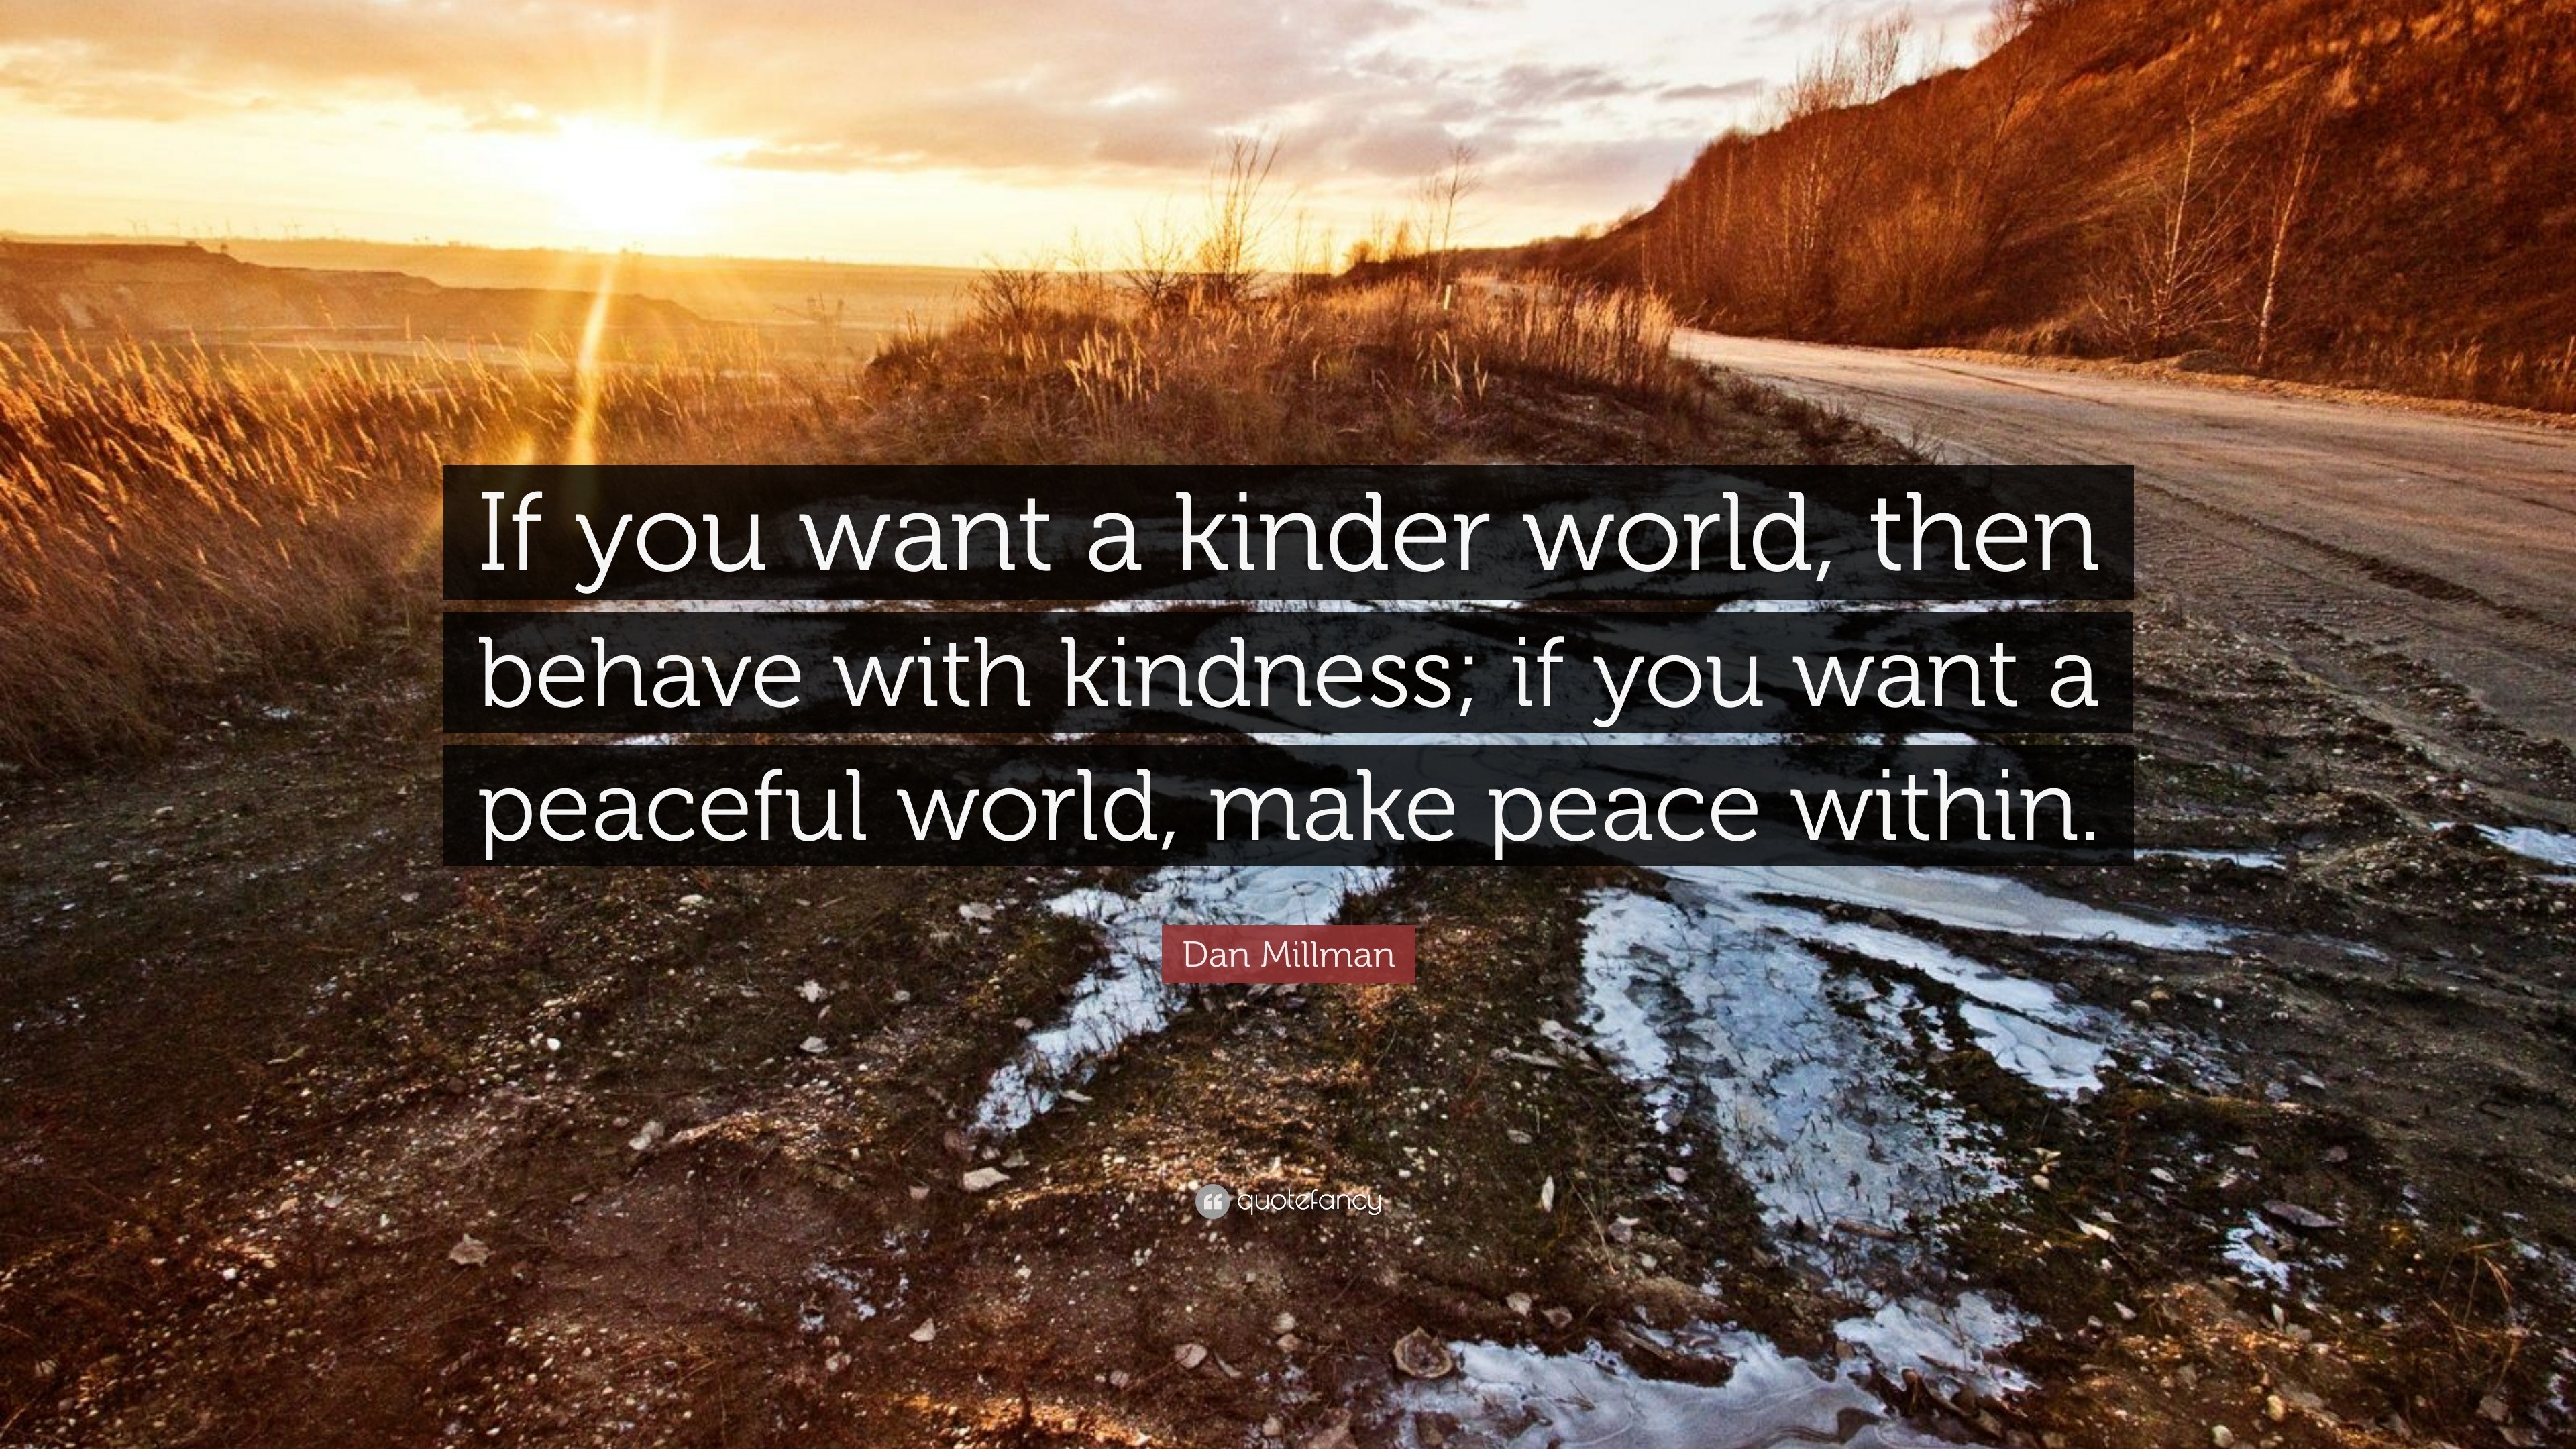 The world is a lot kinder than you think.